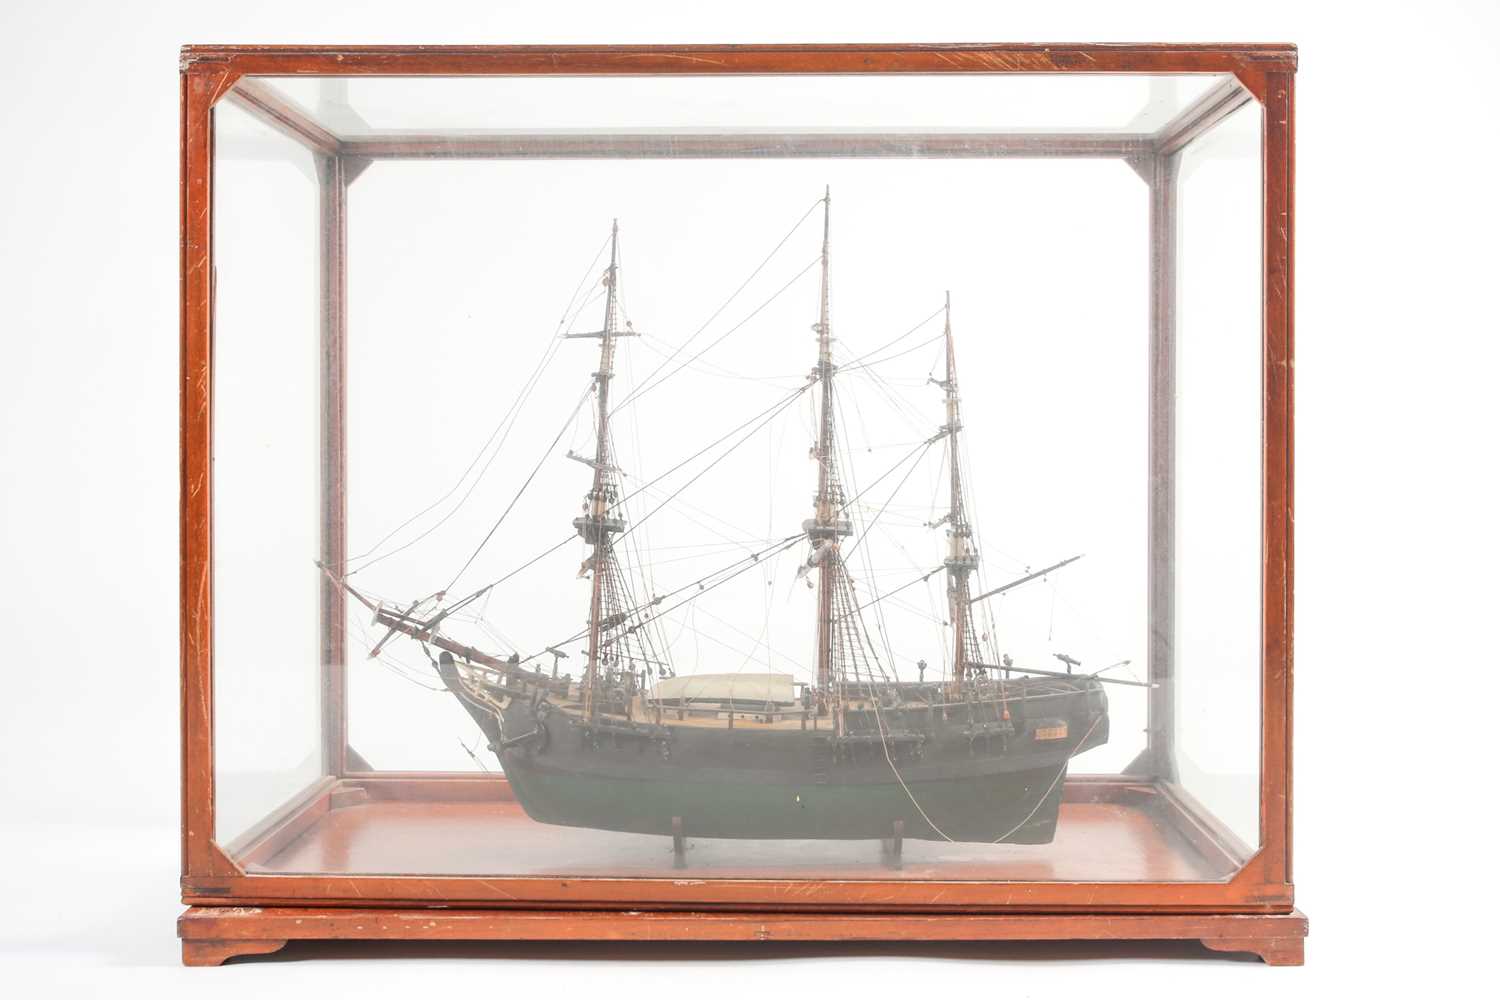 A scale model of the full-rigged HM Bounty with painted detail. Housed in a glazed display case. - Image 6 of 7